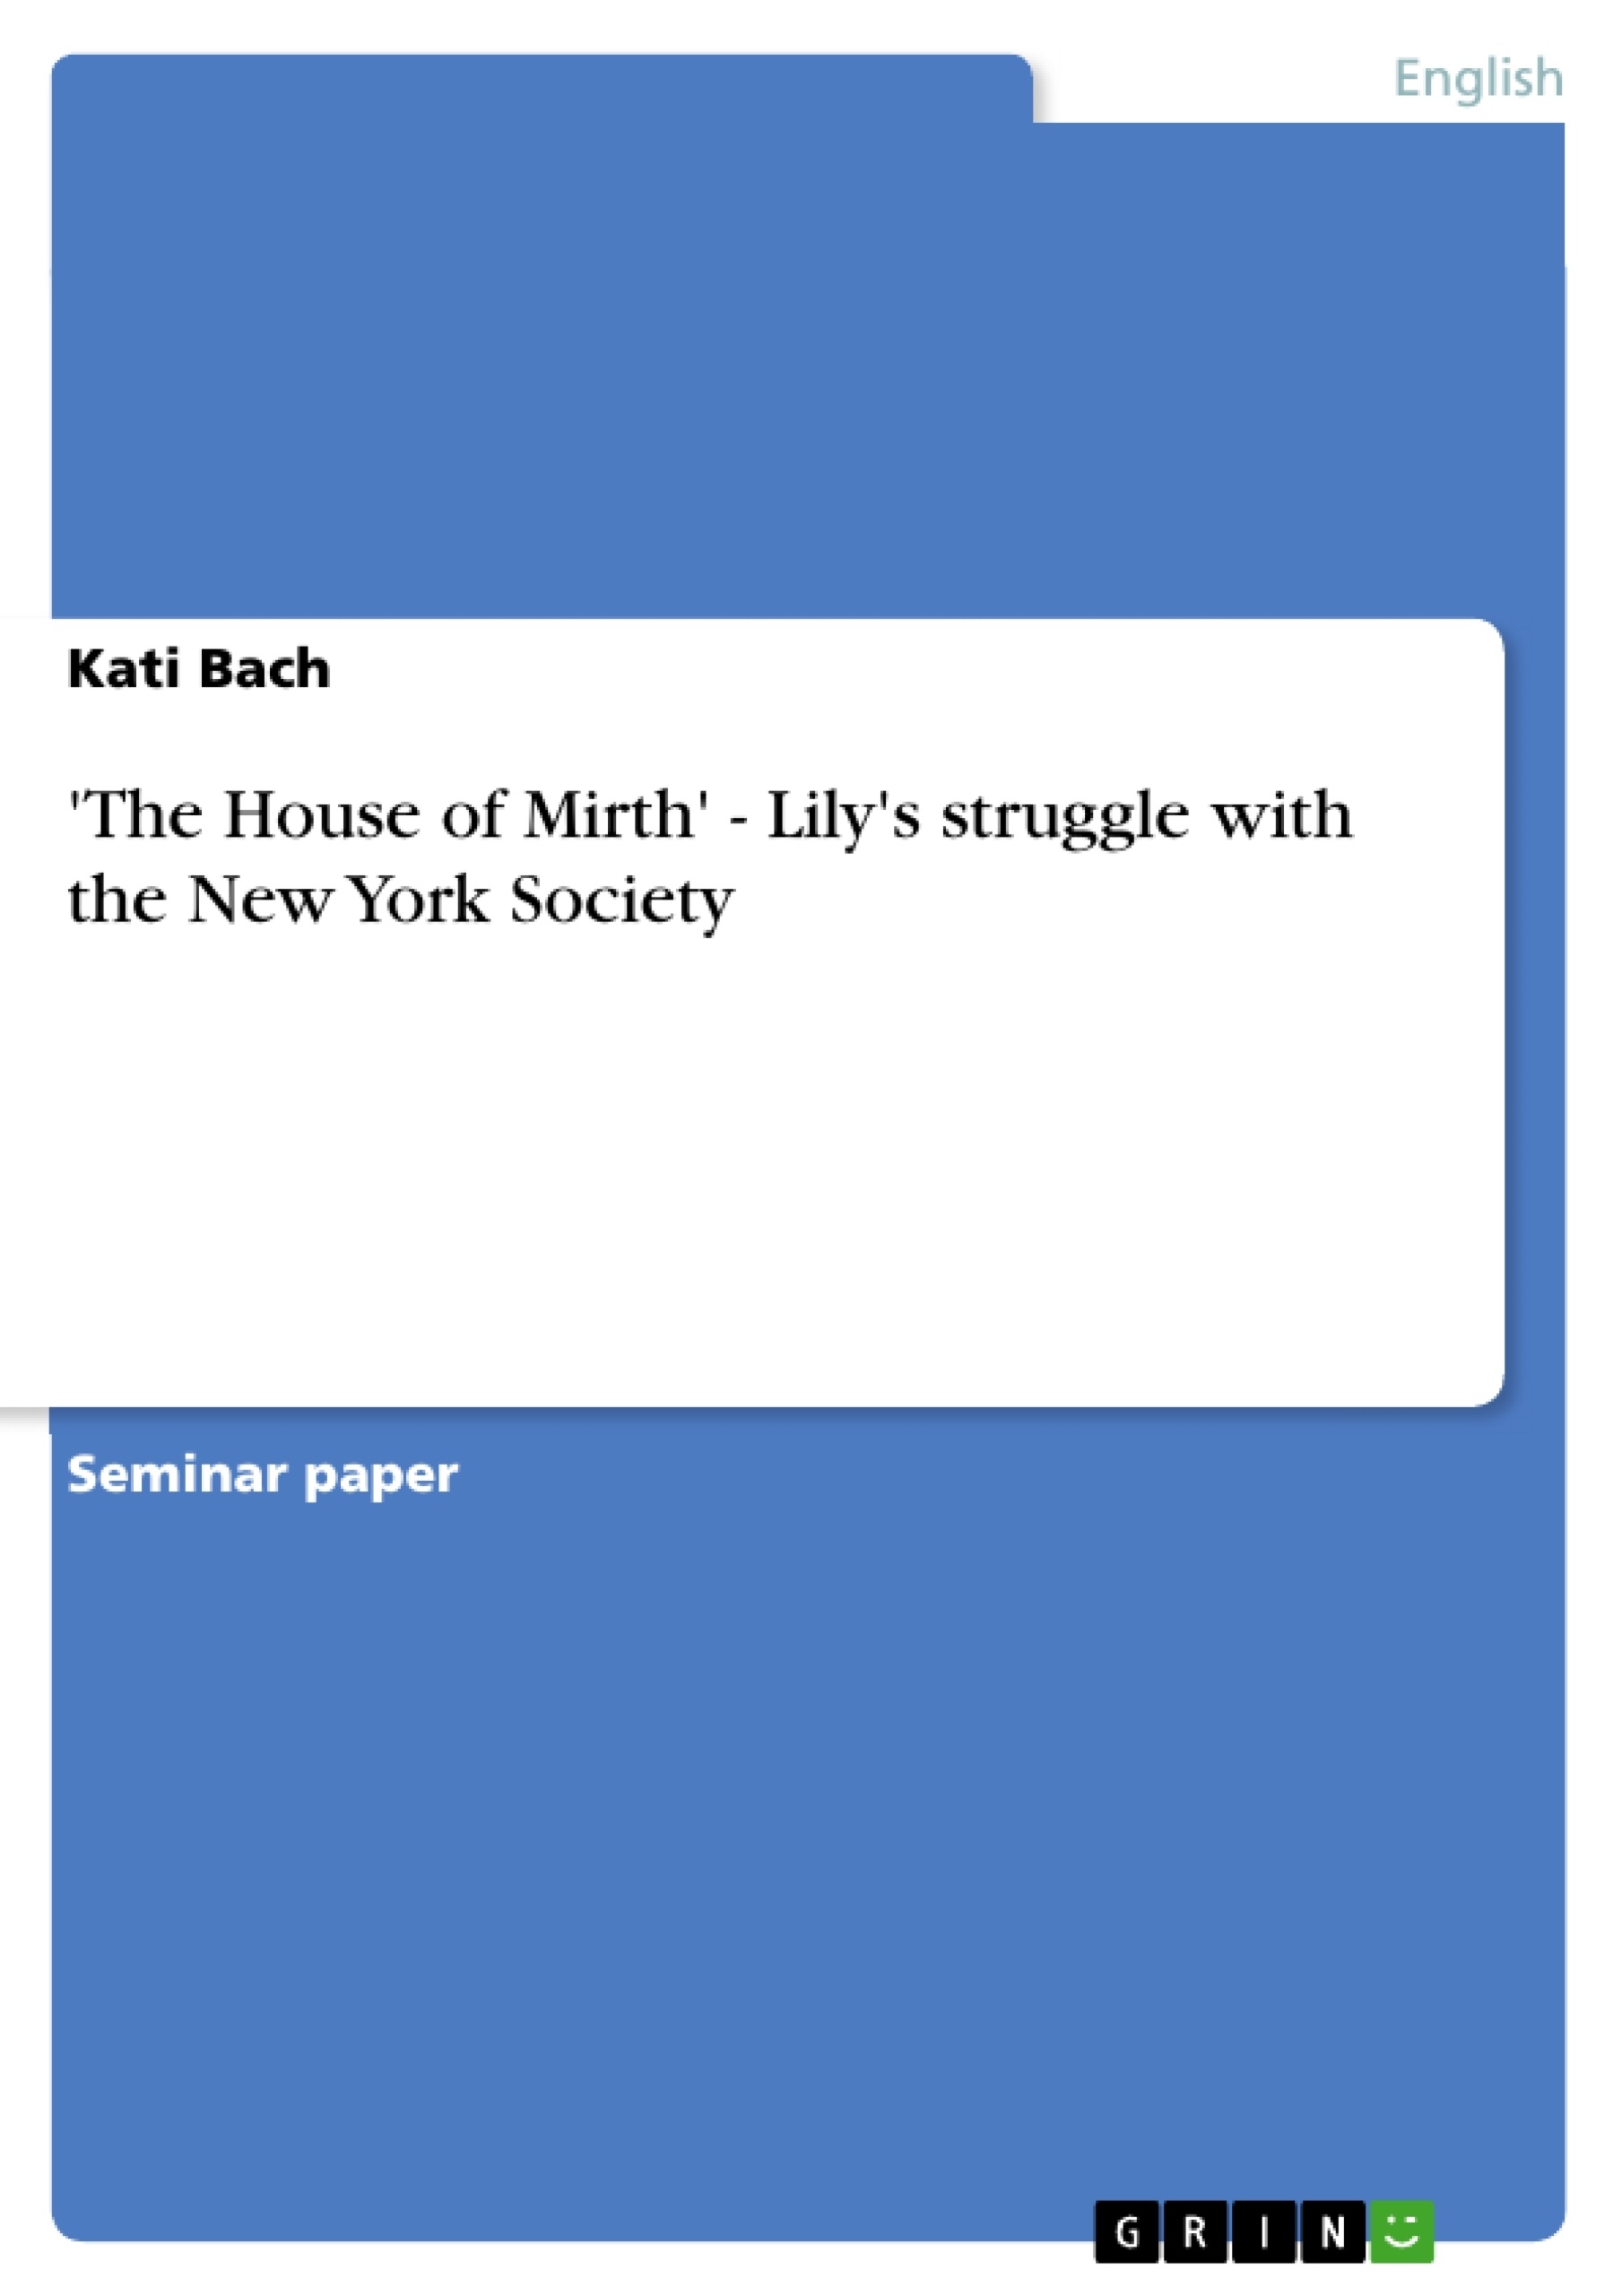 Título: 'The House of Mirth' - Lily's struggle with the New York Society